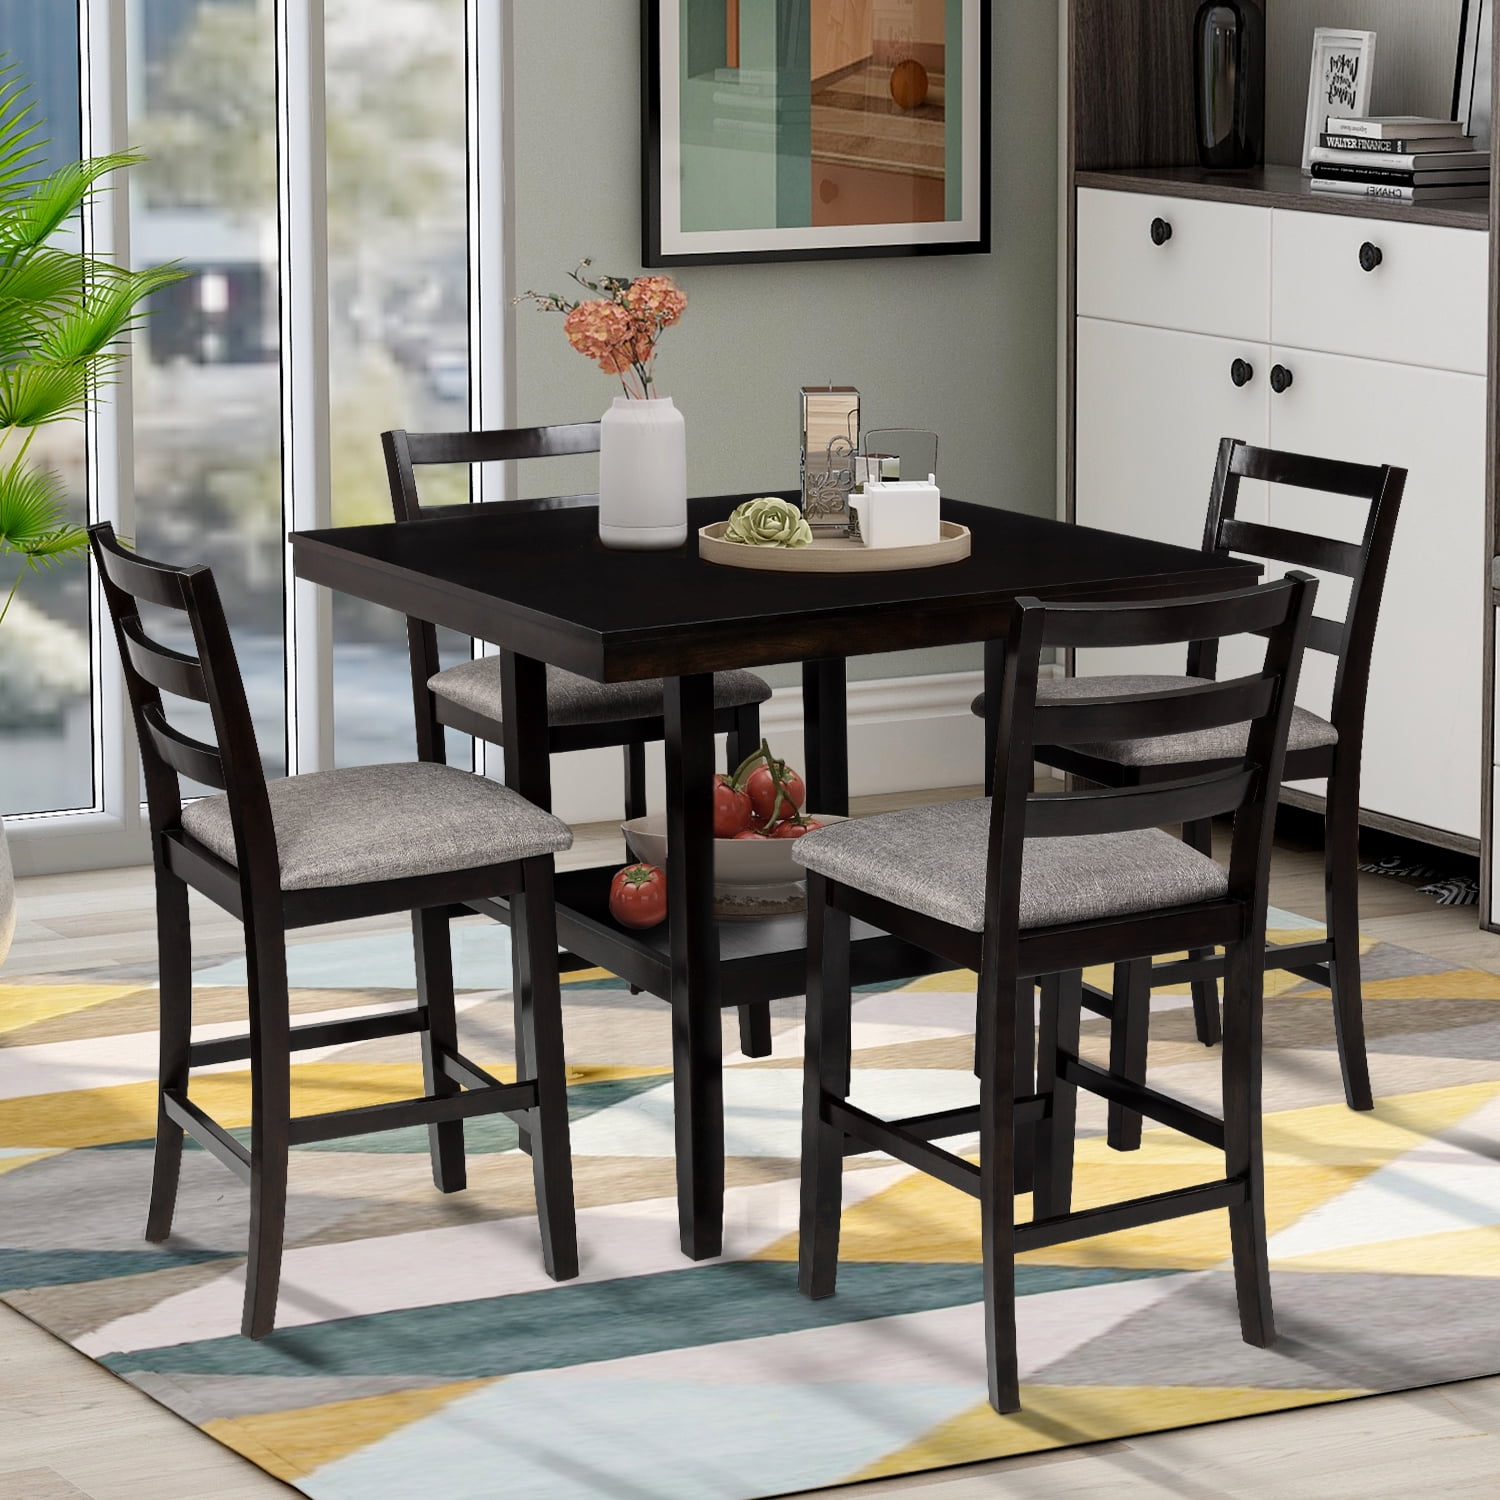 Euroco 5-Piece Counter Height Dining Set, Wooden Dining Set with Padded